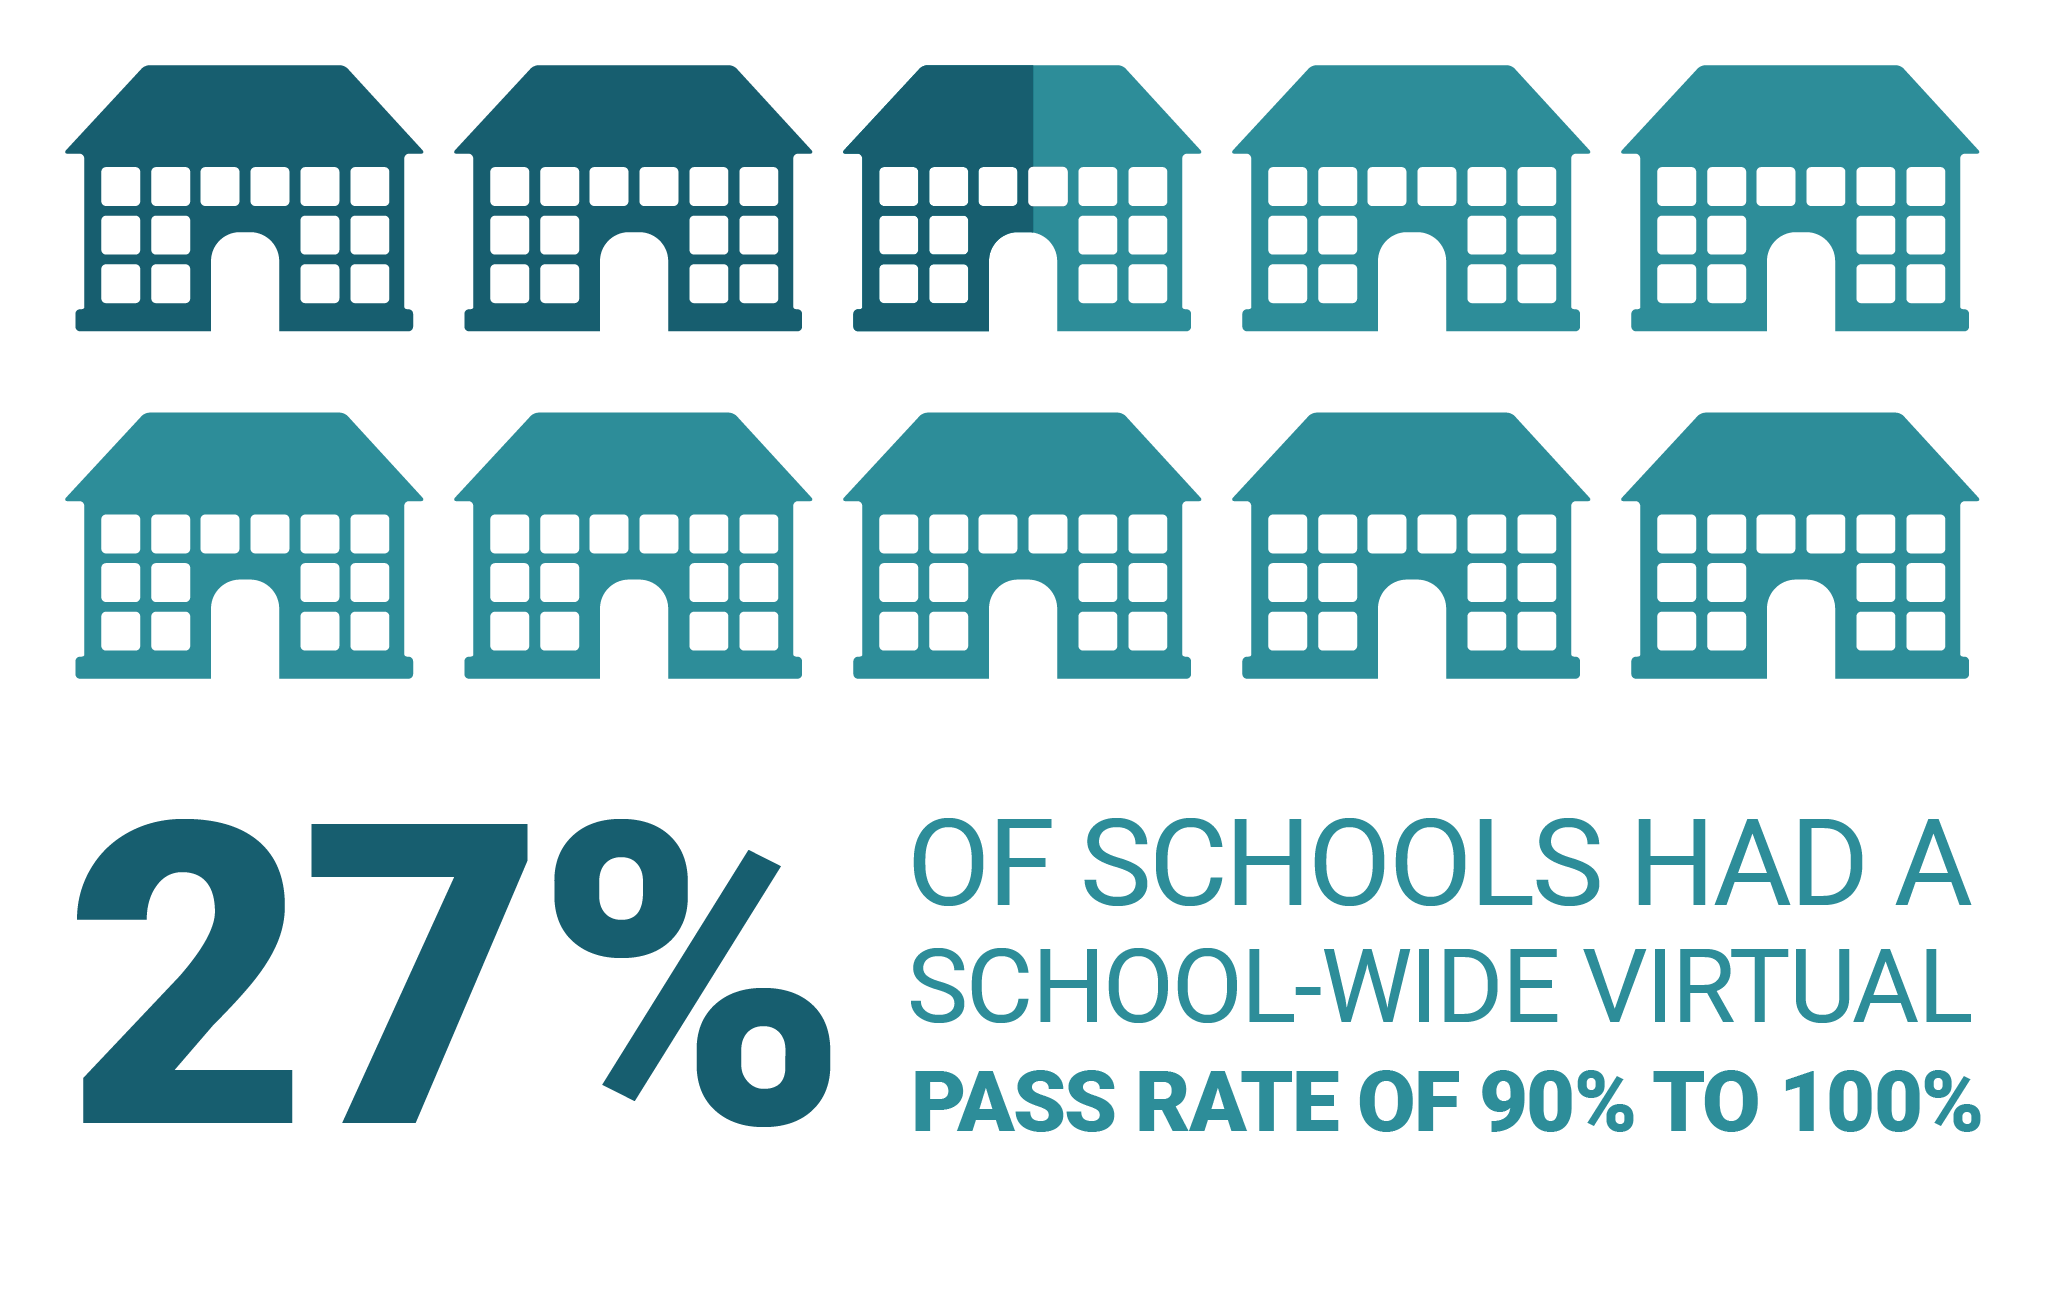 27% of schools had a school-wide virtual pass rate of 90% to 100%